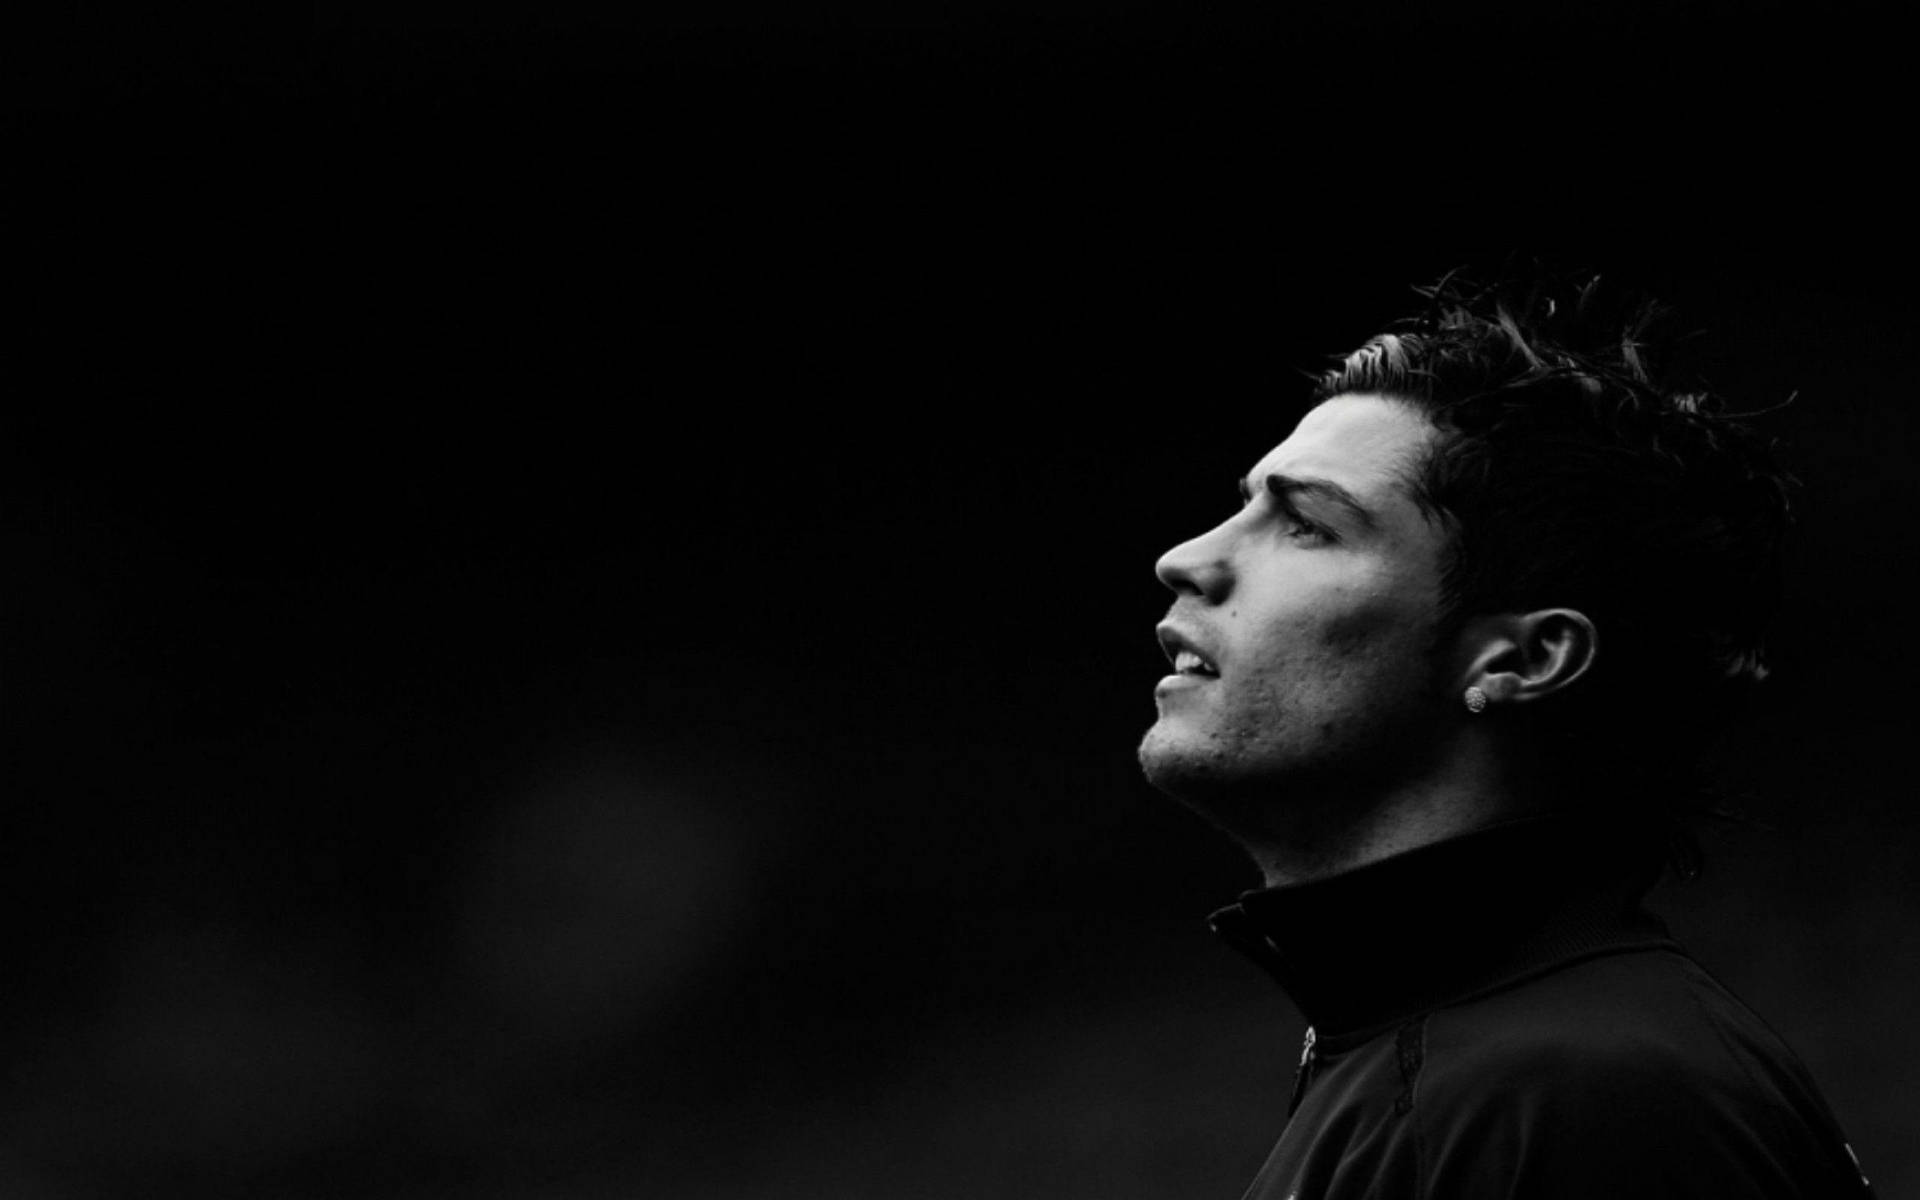 Cristiano Ronaldo Stands With Intensity Wallpaper